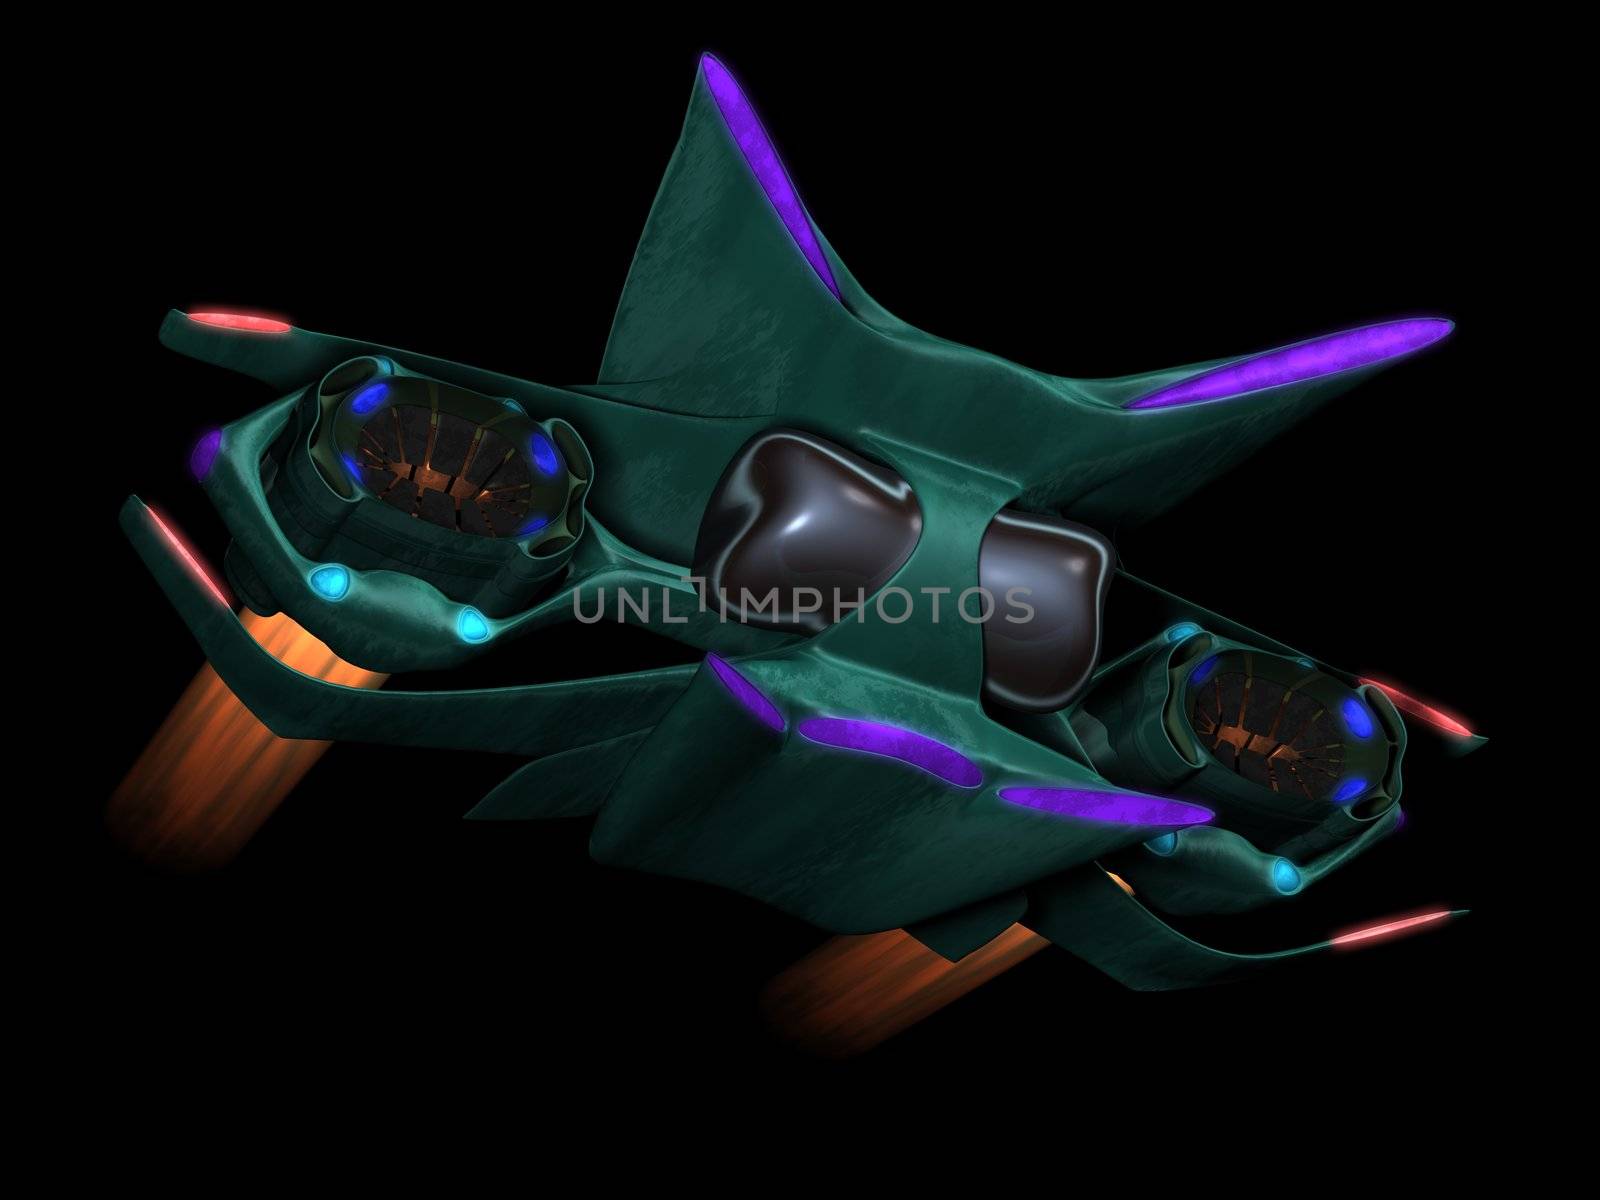 Alien space ship front view on a black background